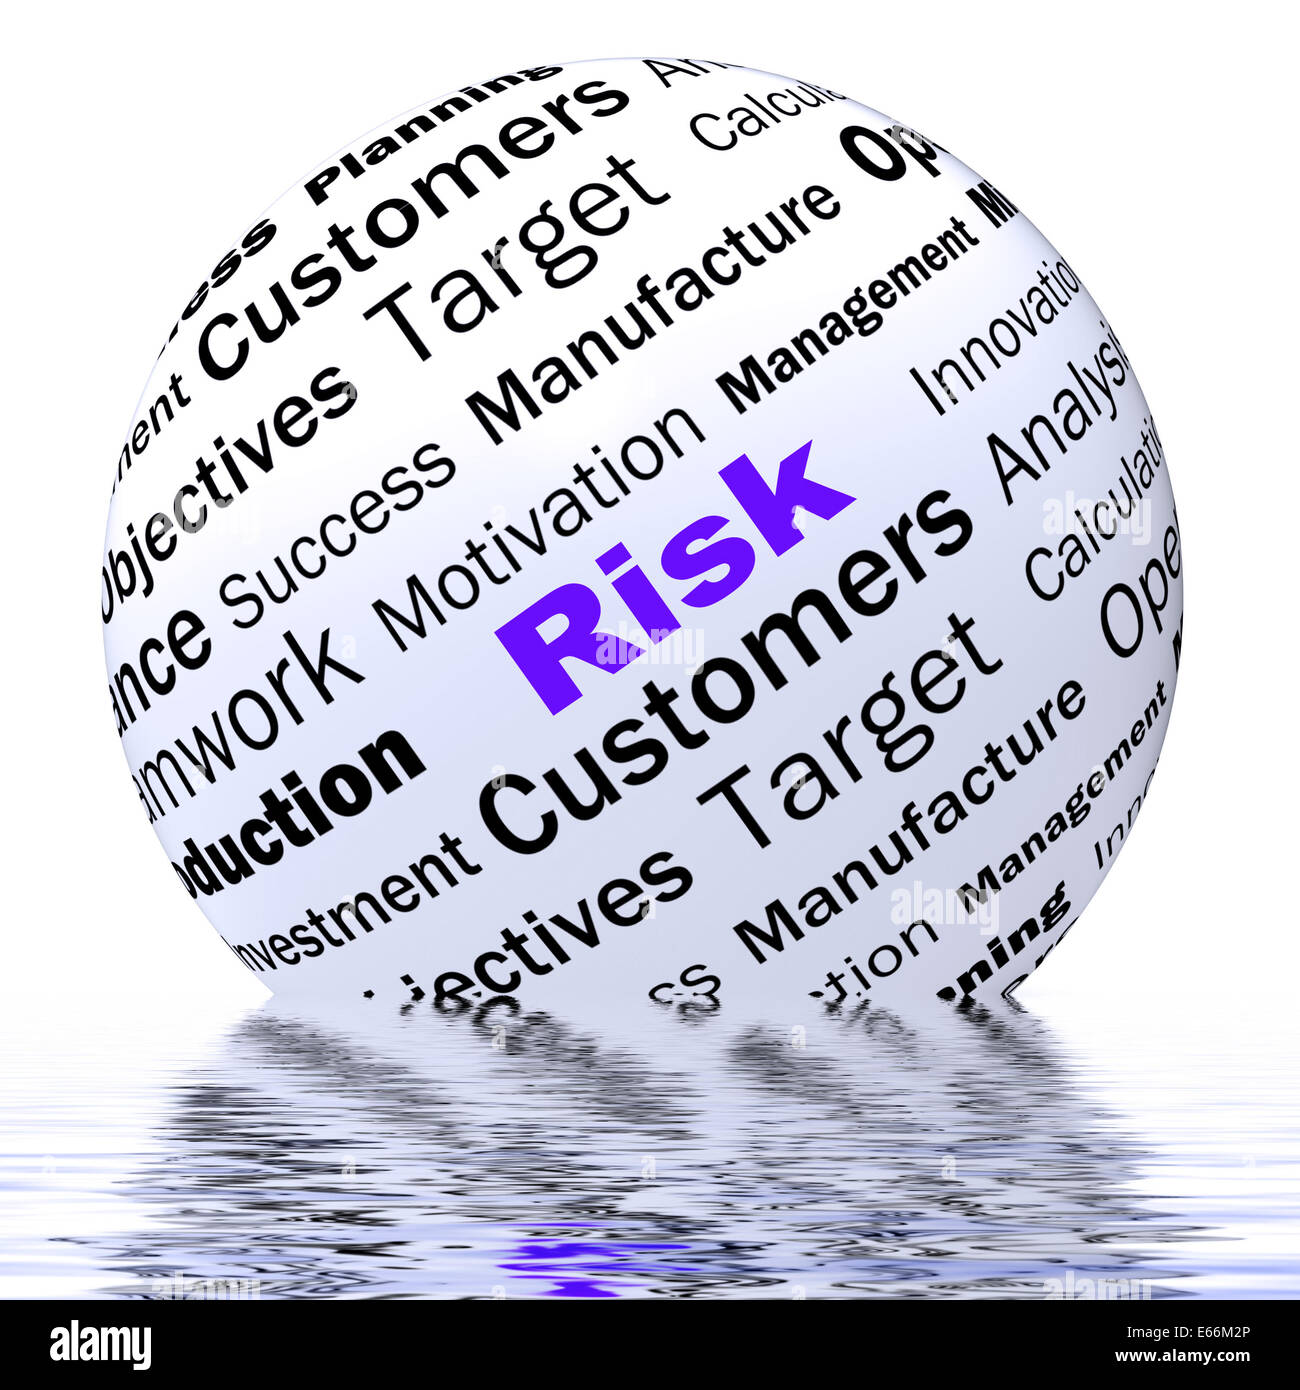 Risk Sphere Definition Displaying Dangerous Insecure And Unstable Stock Photo